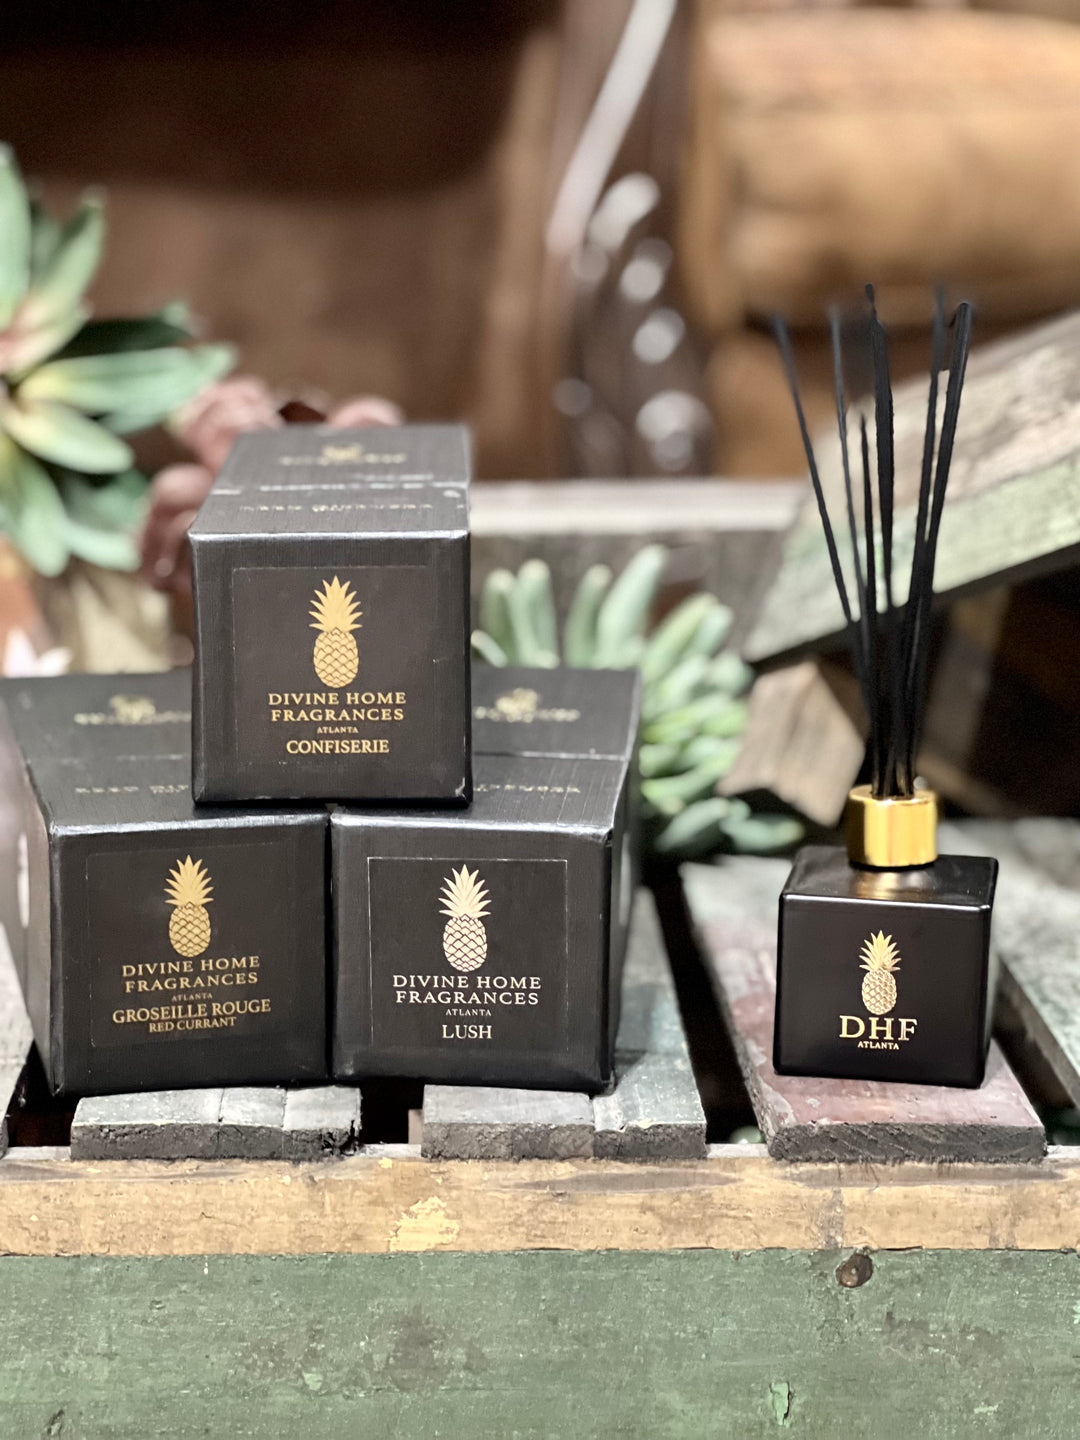 Divine Home Fragrance Reed Diffusers